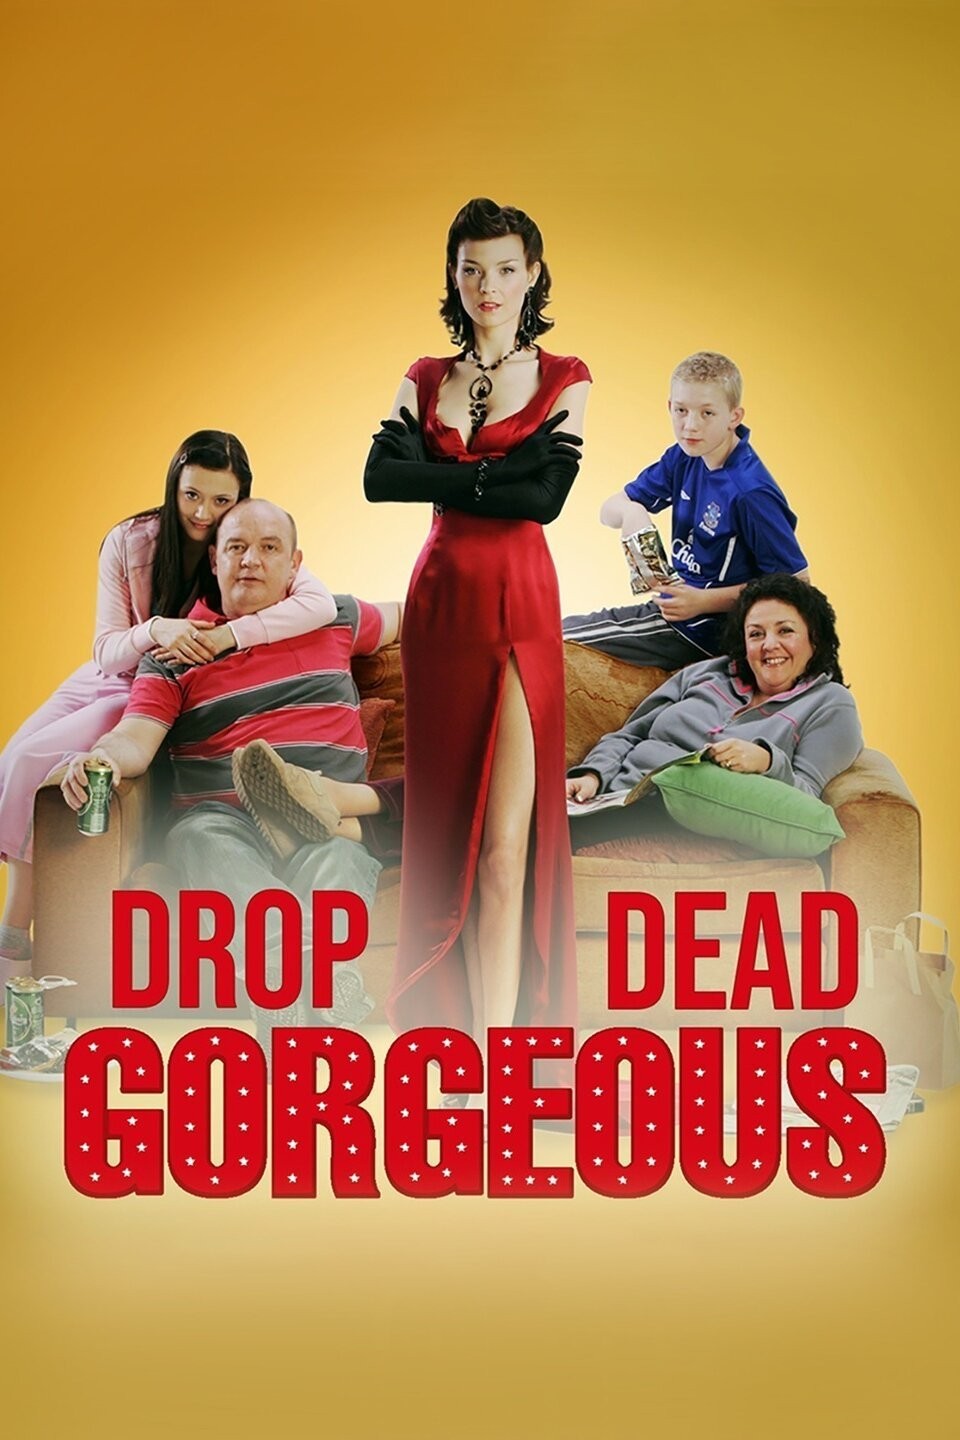 angelyn peralta recommends Drop Dead Gorgeous Lesbians